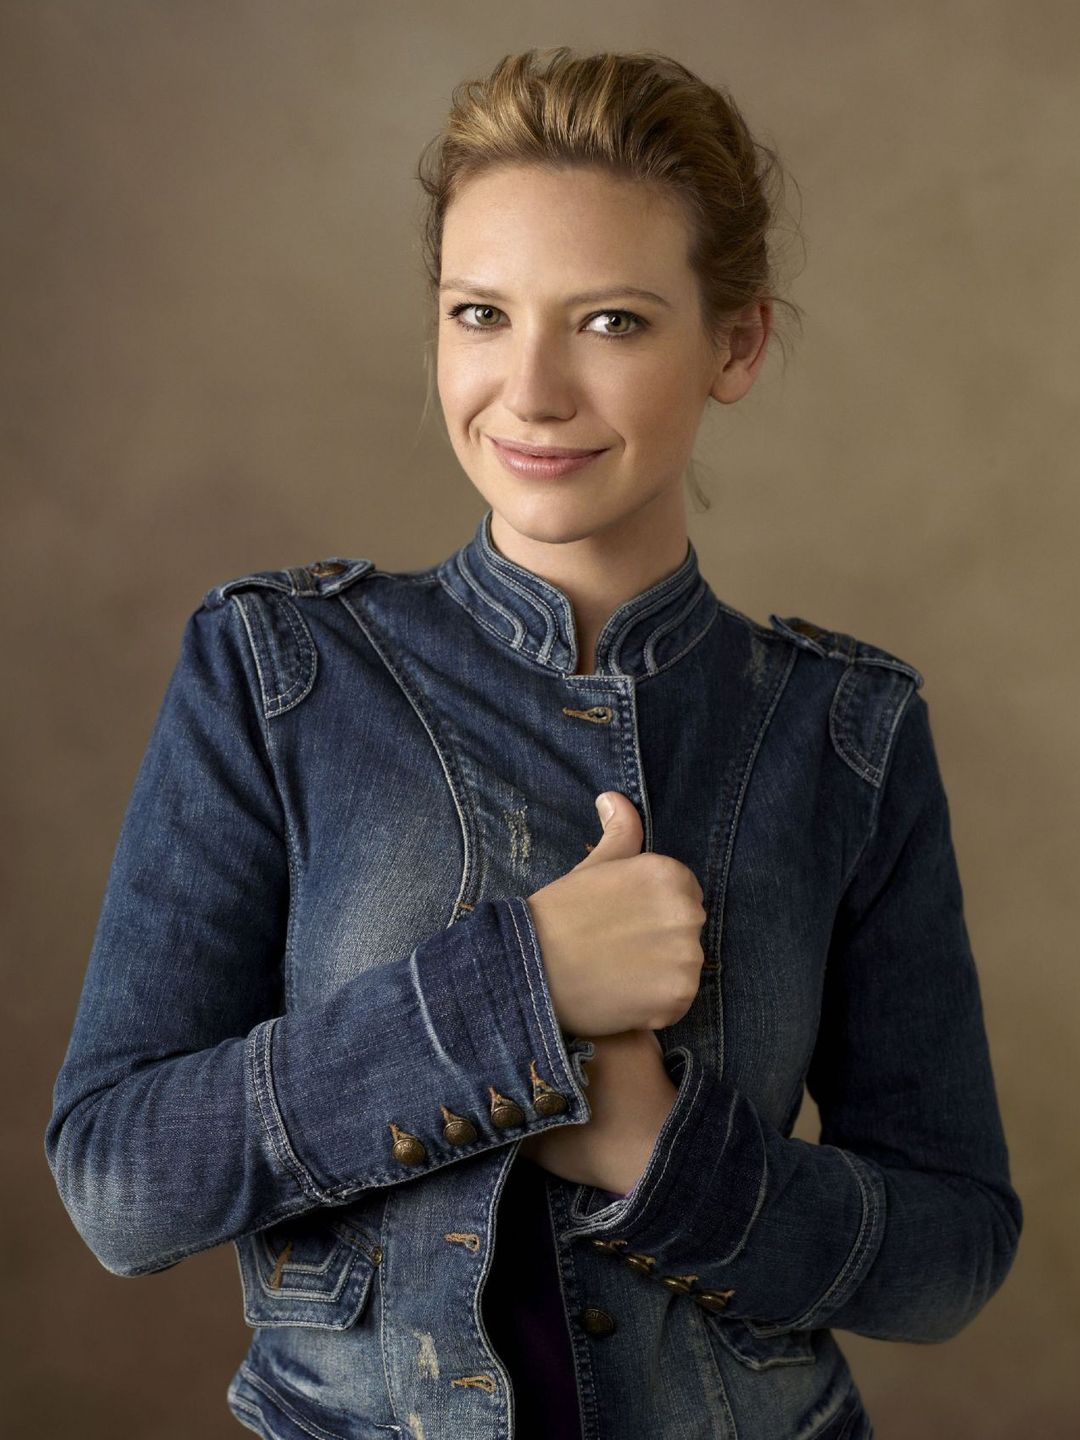 Anna Torv who is her father